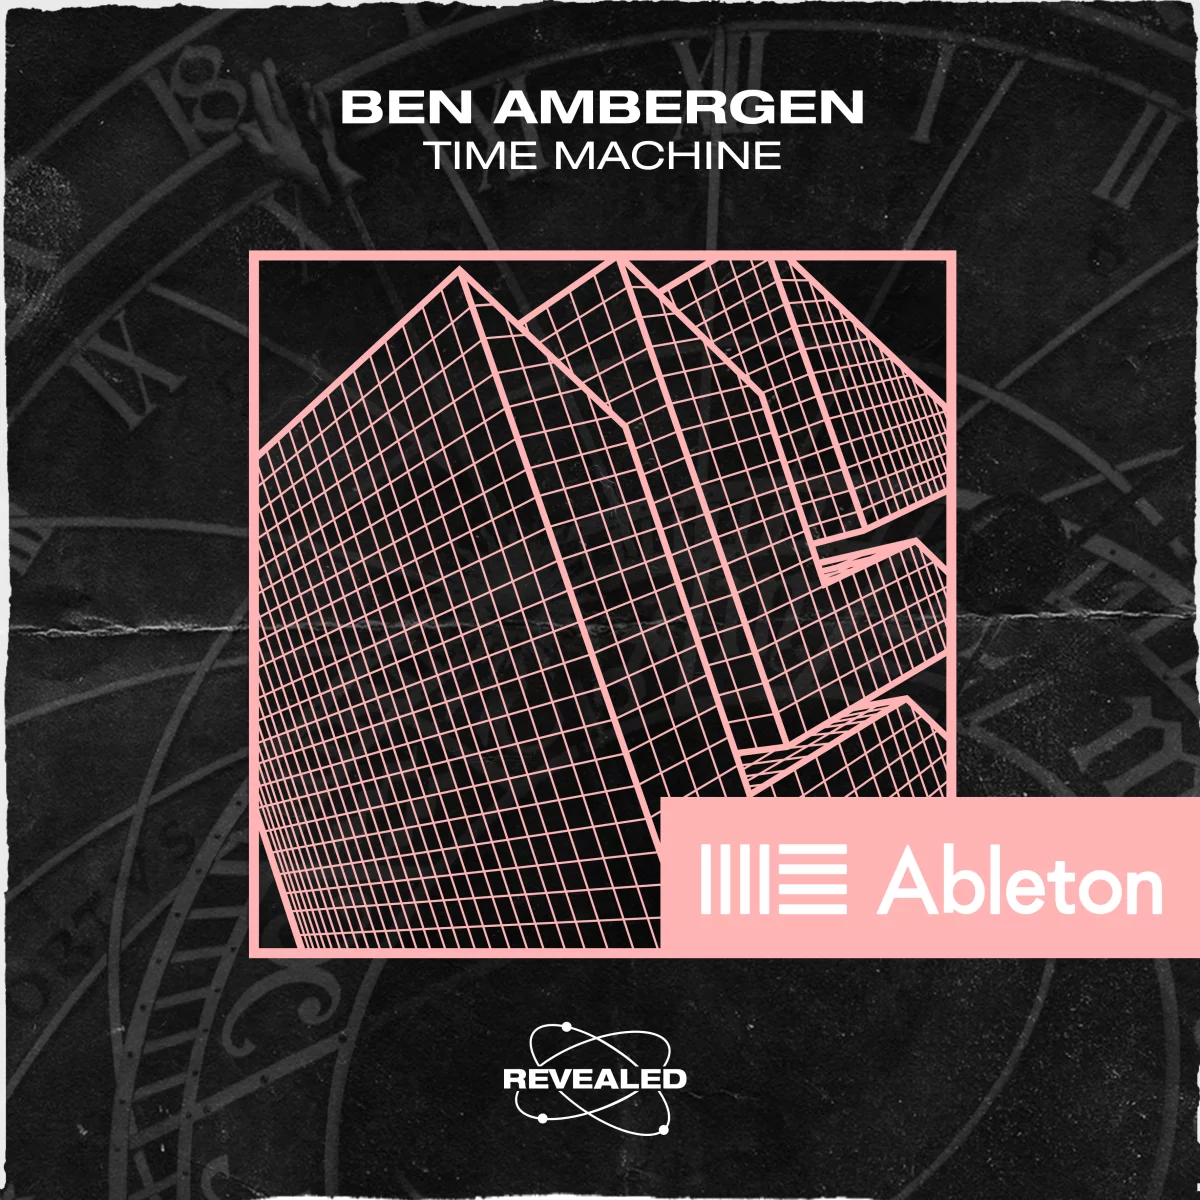 Time Machine (Ableton Project) - Ben Ambergen⁠ 